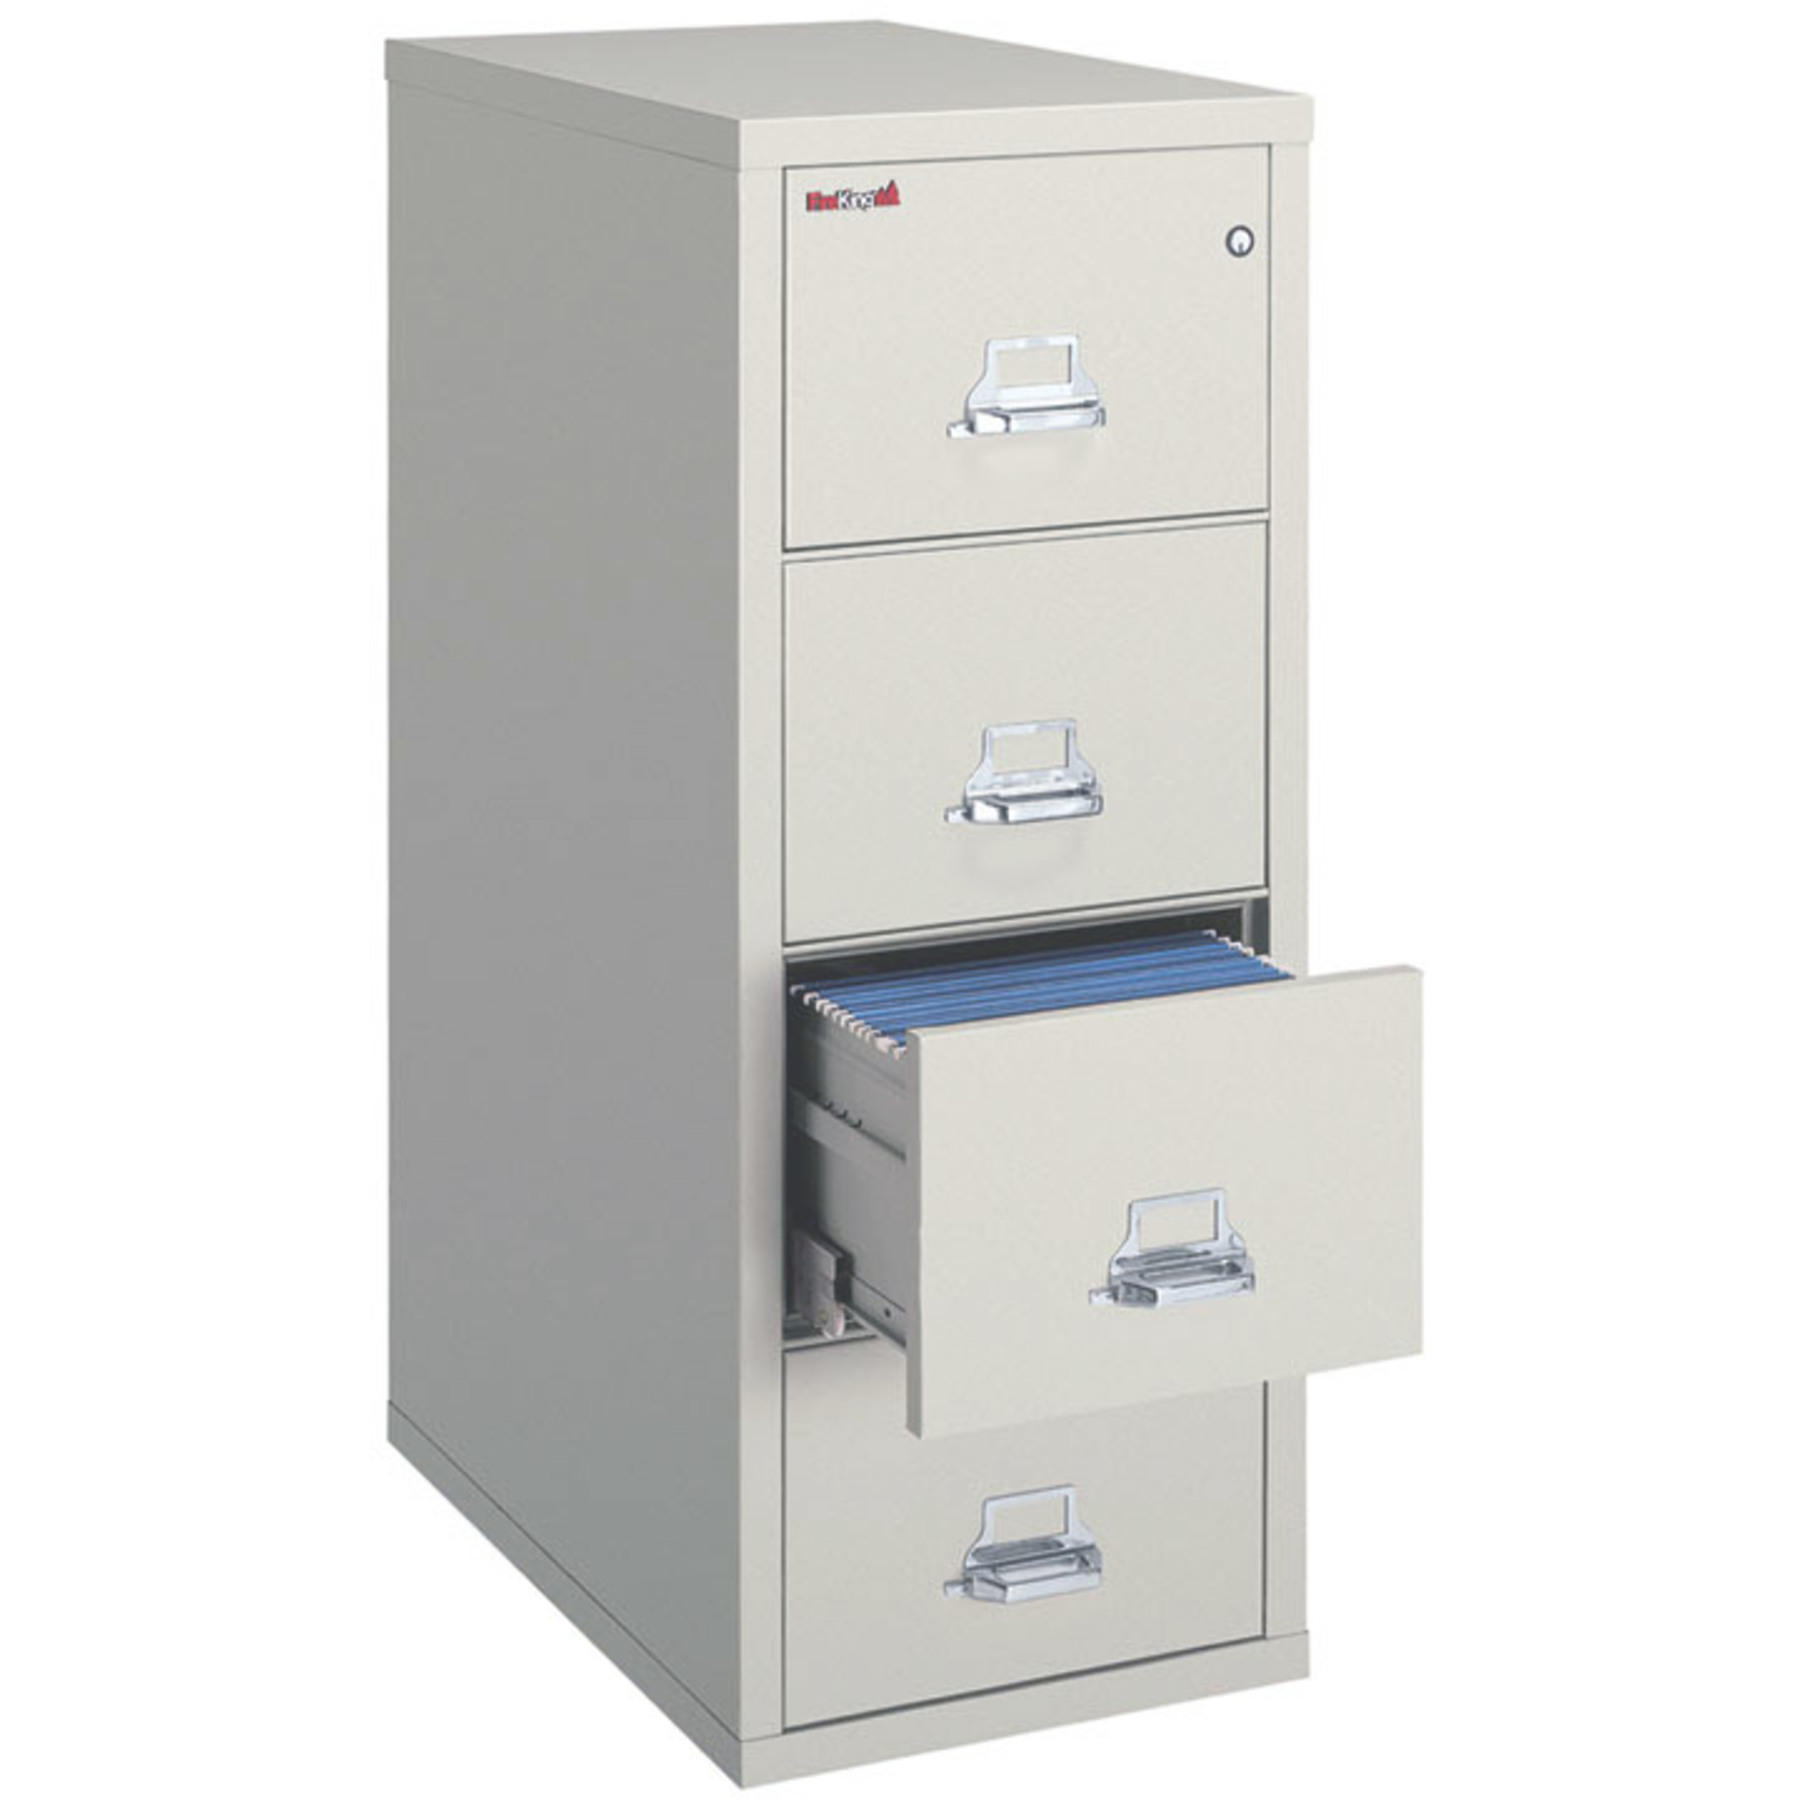 Fireking 4 2125c 1 Hour Fireproof Filing Cabinet All Safes Ireland in dimensions 1800 X 1800